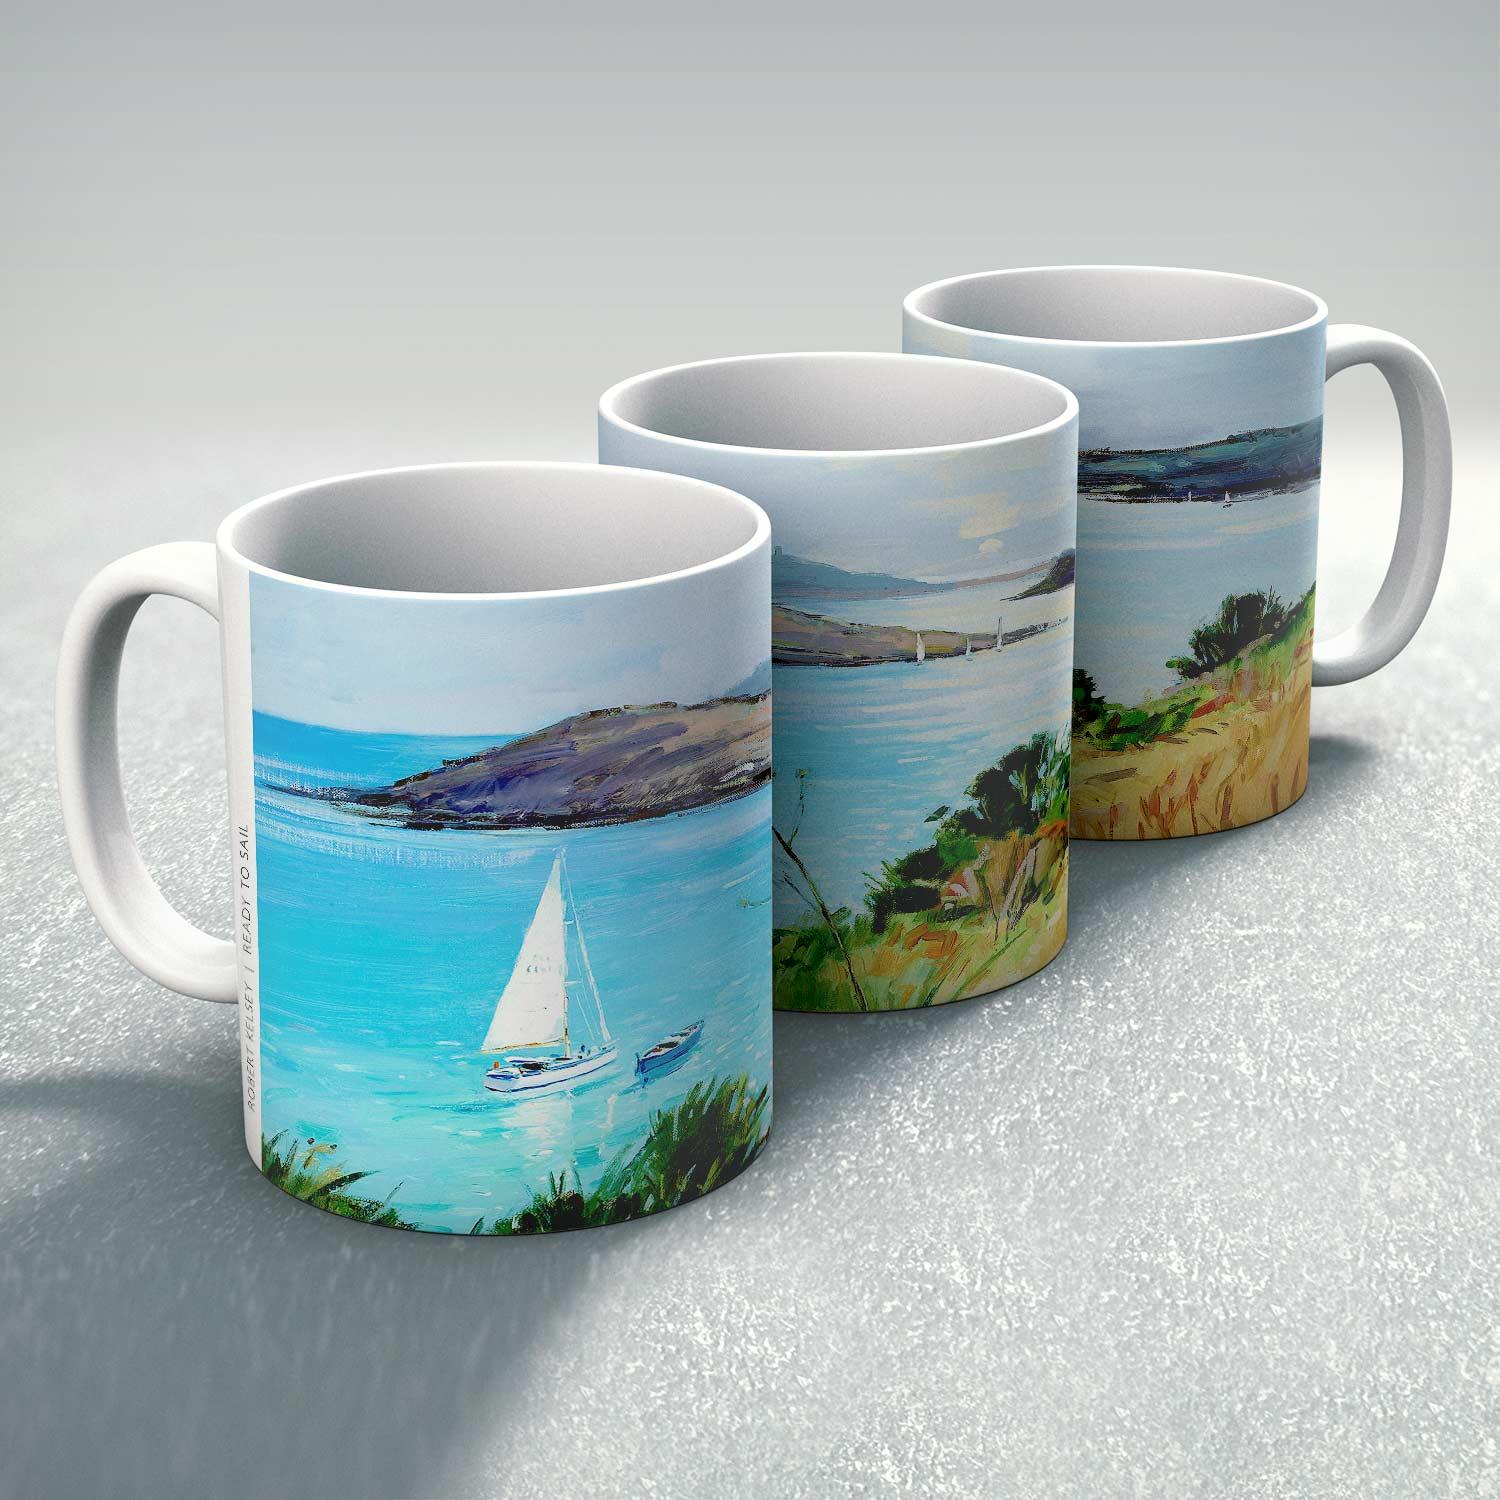 Ready to Sail Mug from an original painting by artist Robert Kelsey